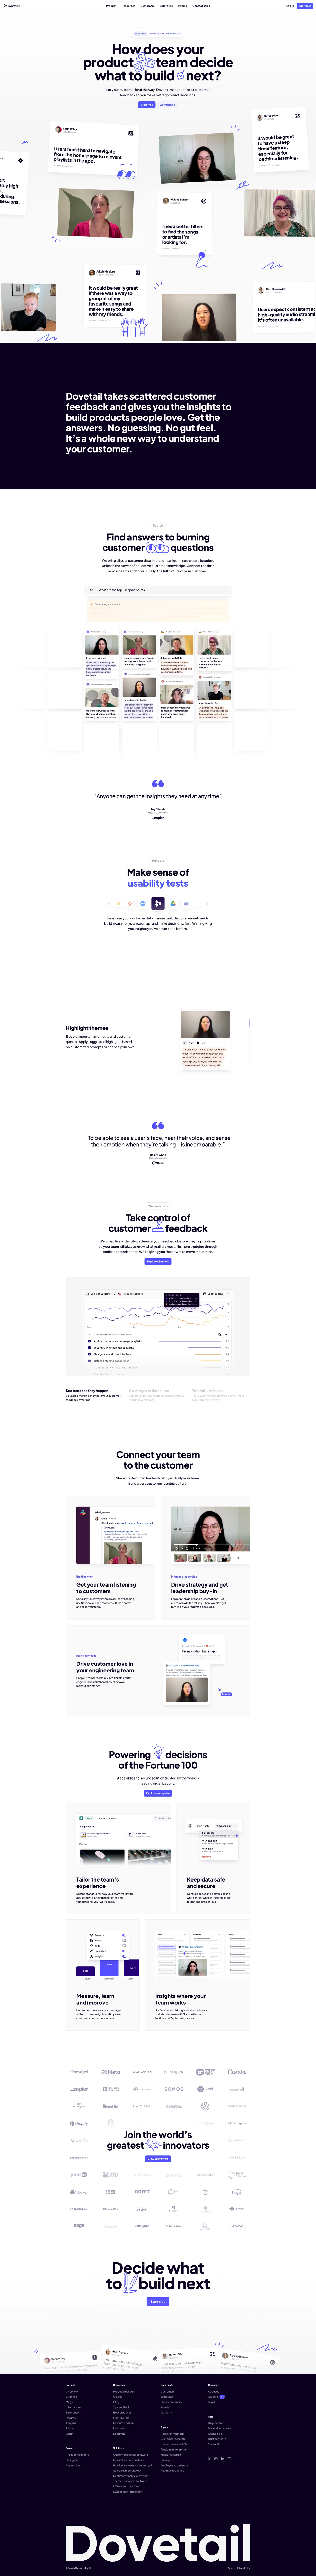 Dovetail Landing Page Example: The flexible Customer Insights Hub for teams and businesses that get you from data to insights fast, no matter the research method.